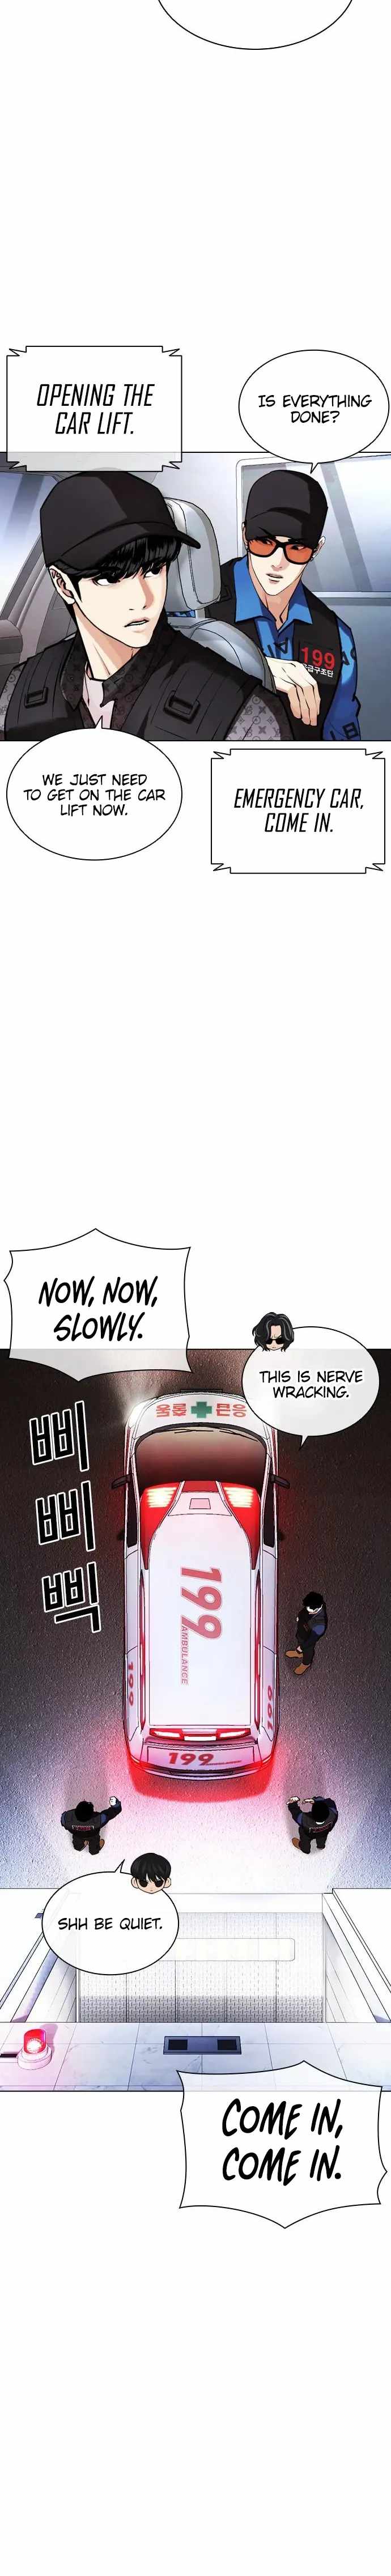 Lookism Chapter 450 image 36